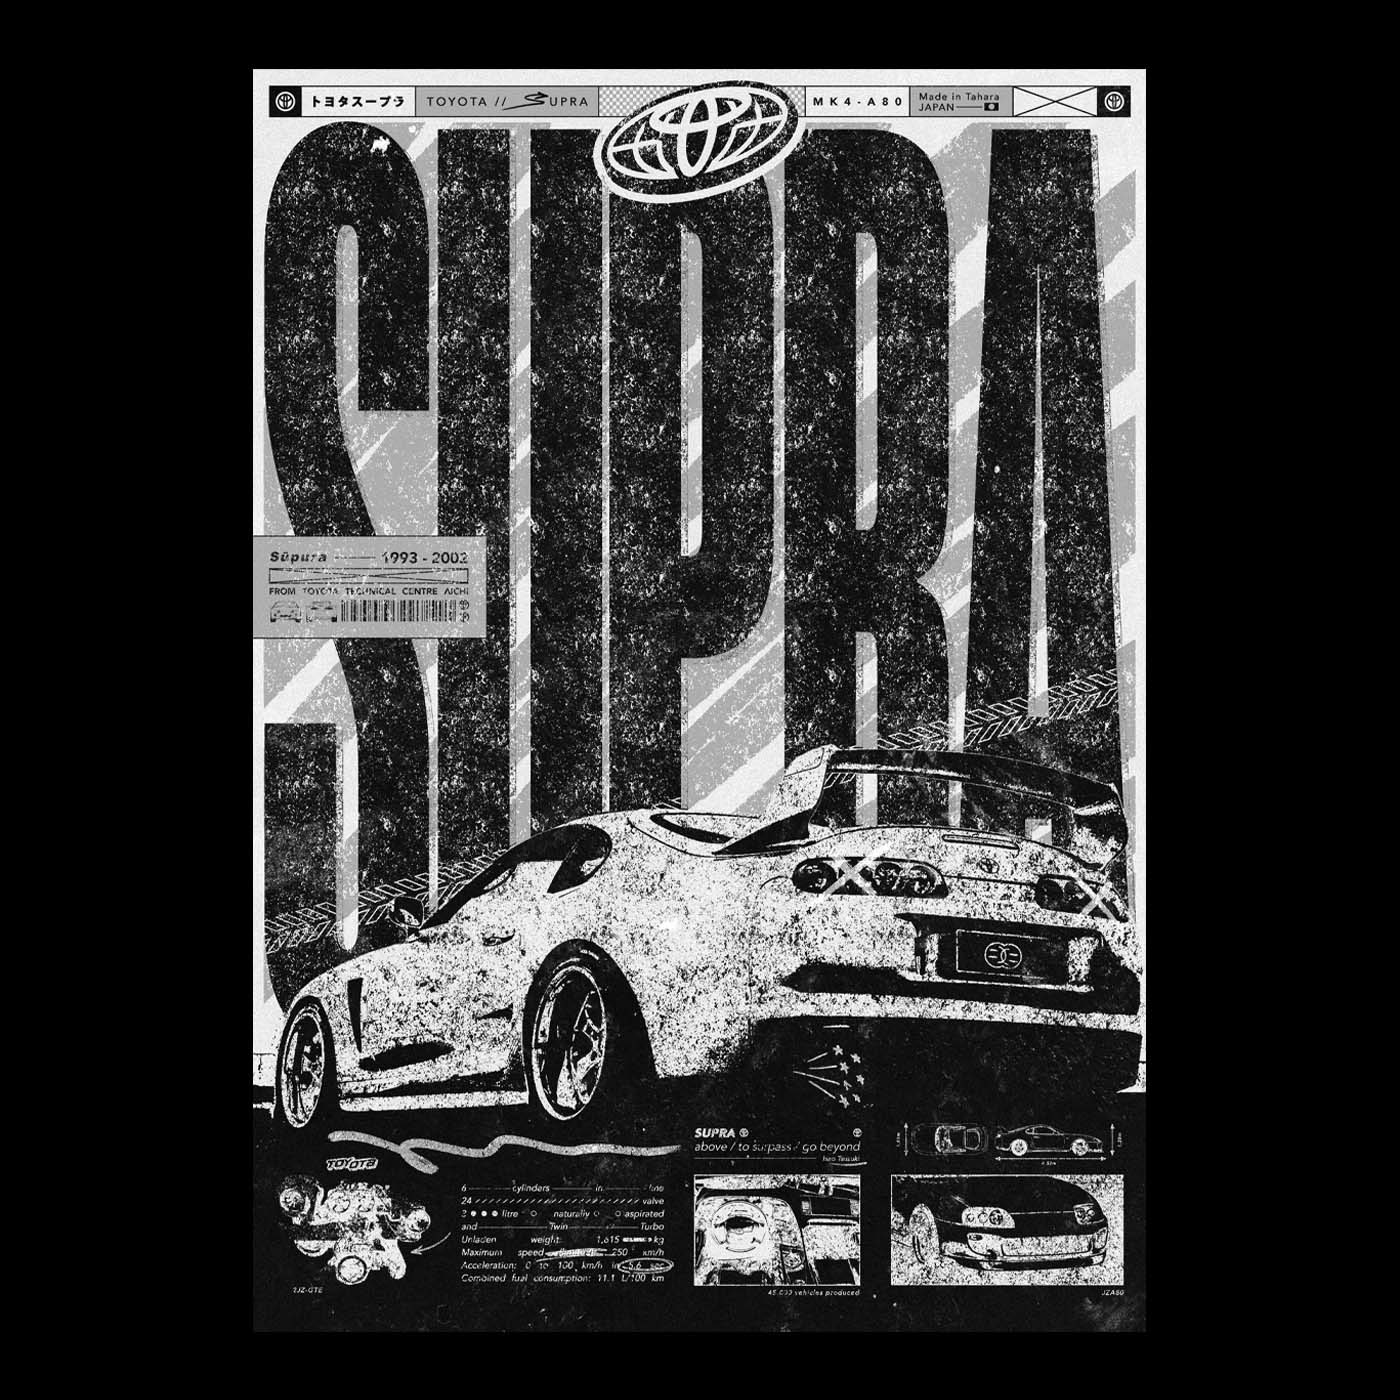 A print poster design render of a toyota supra racing car in a brutalism style in black and white